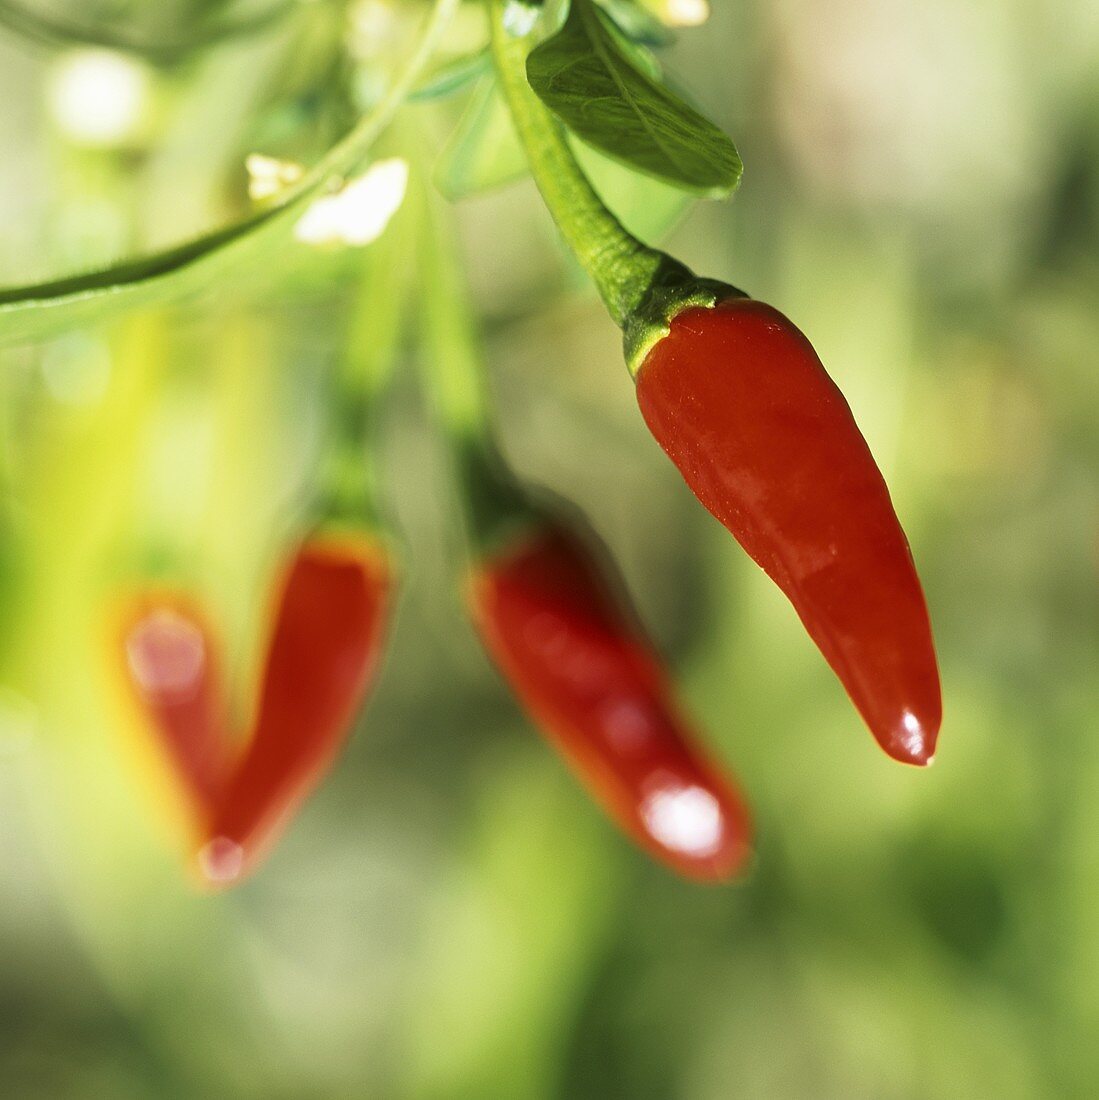 Bird's eye chillies on the plant